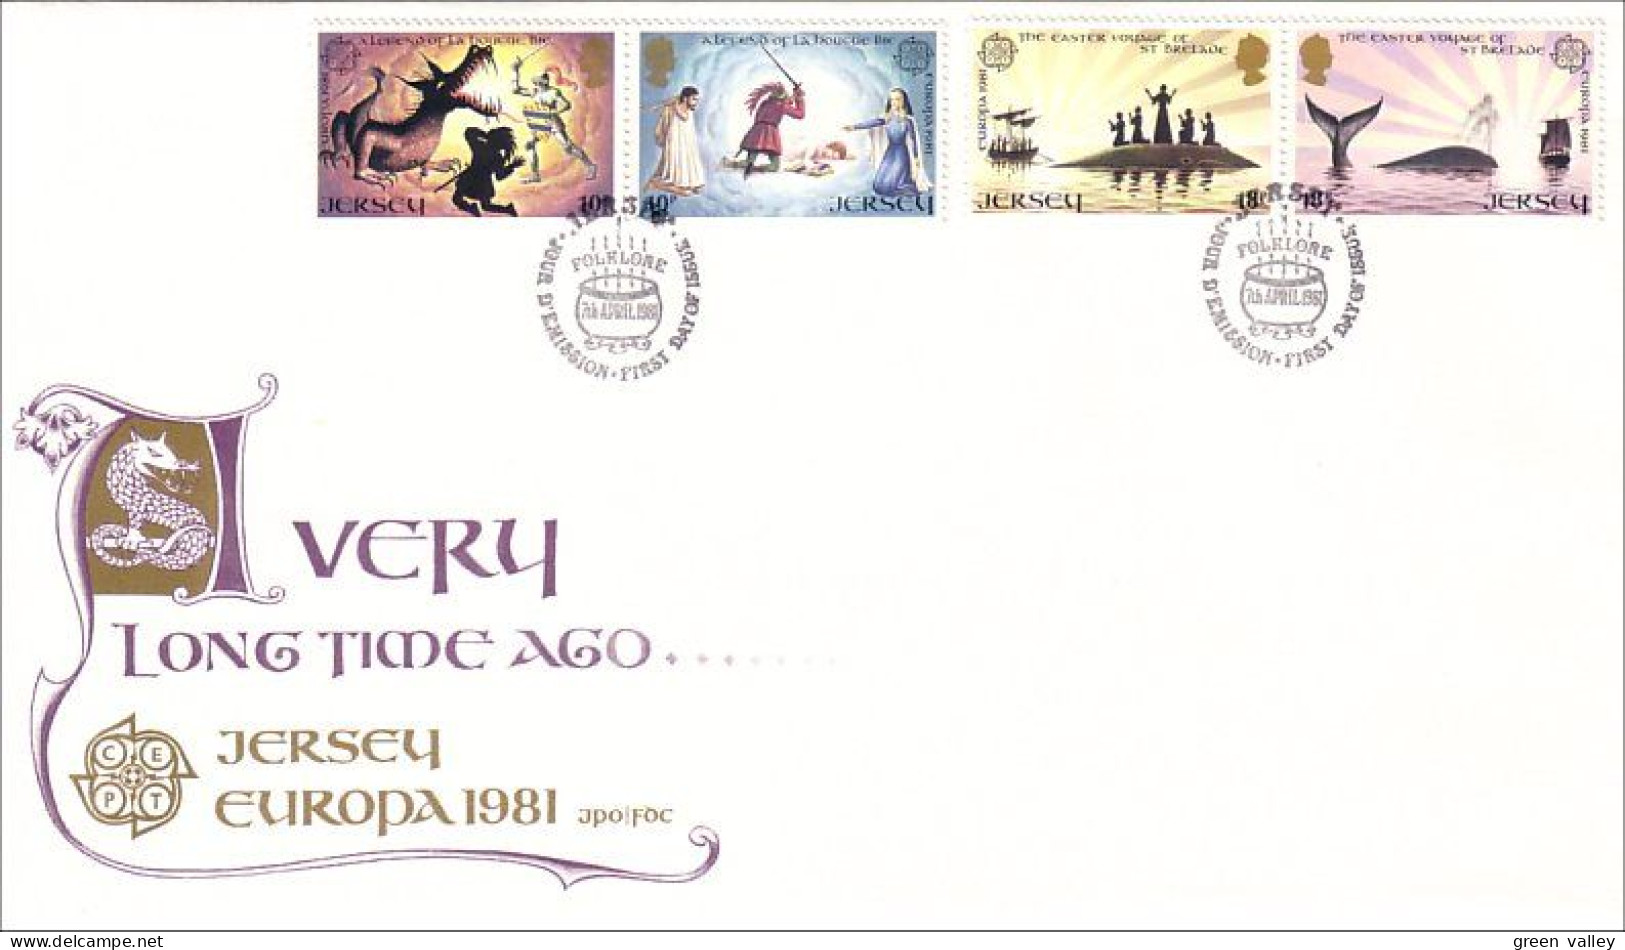 Jersey Folklore Legends Contes FDC ( A81 750b) - Fairy Tales, Popular Stories & Legends